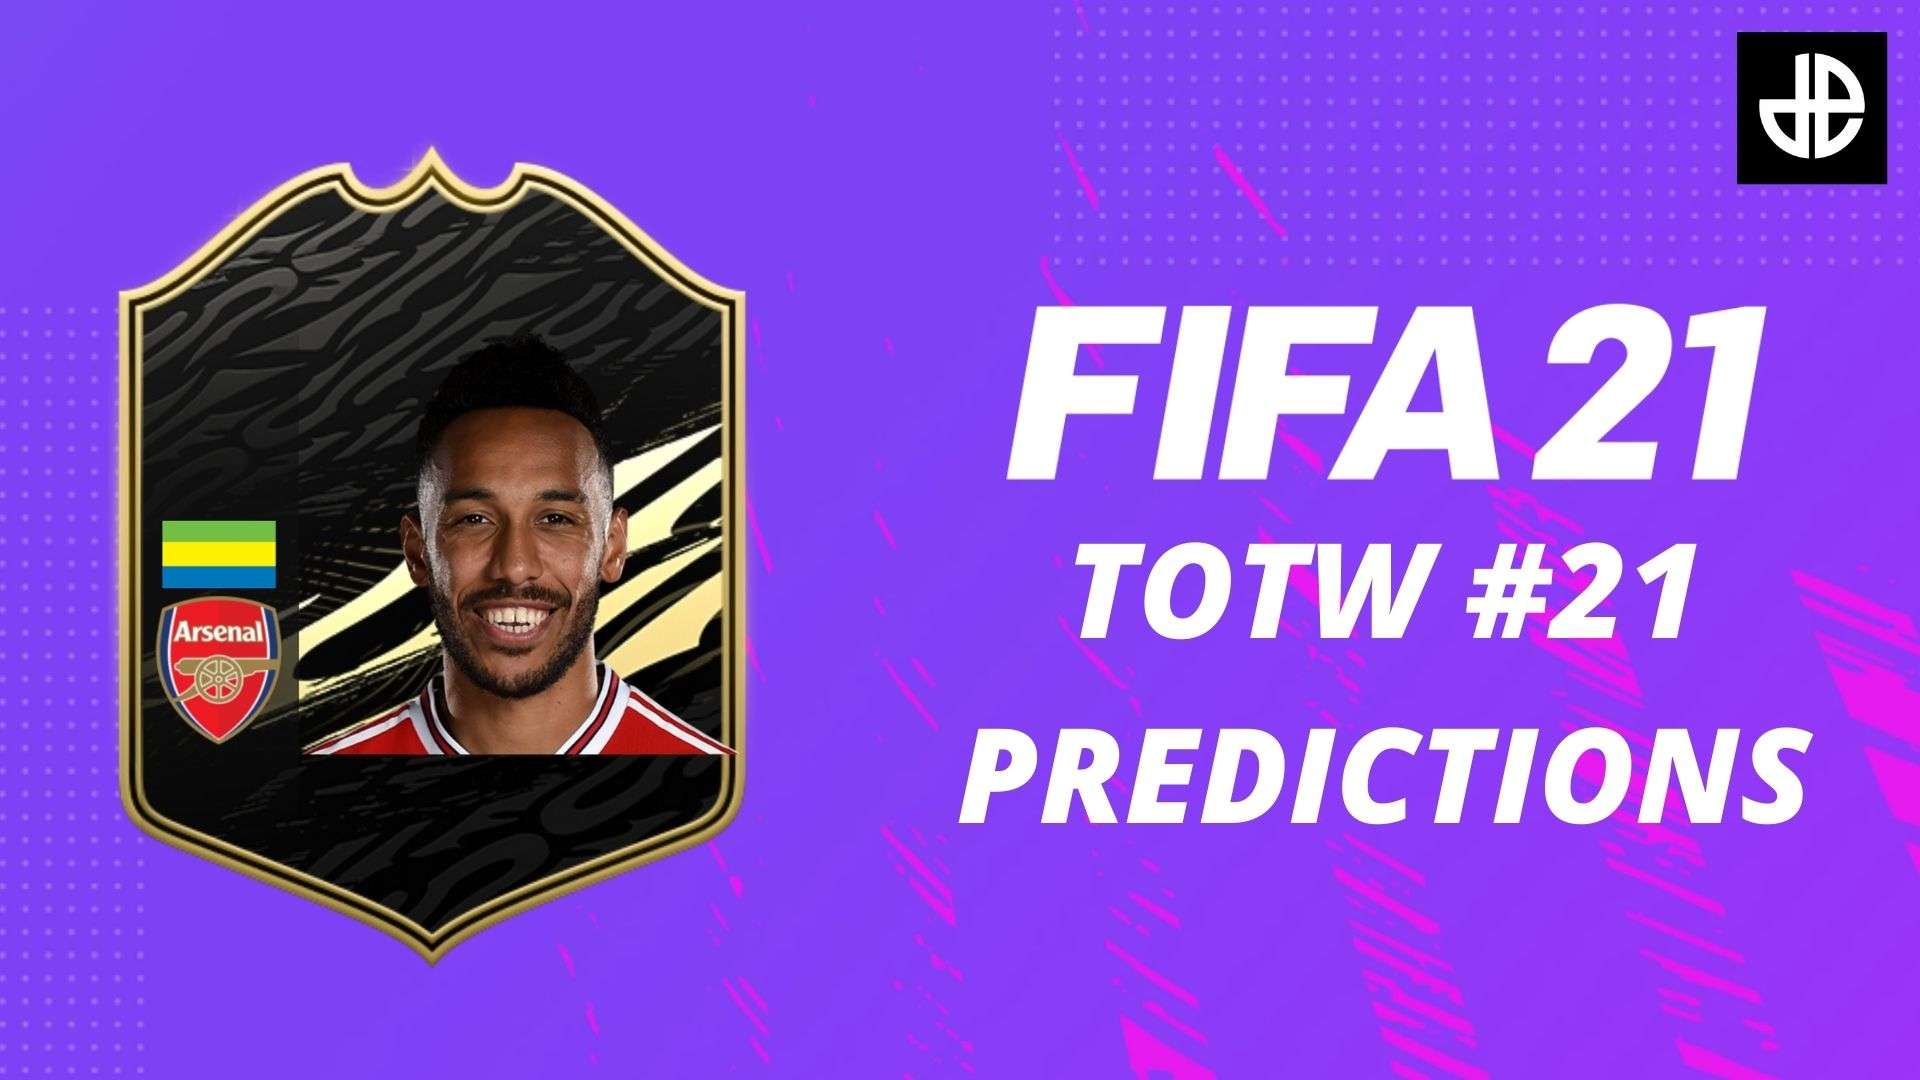 Pierre-Emerick Aubameyang with a FIFA 21 TOTW Card in TOTW 21 predictions